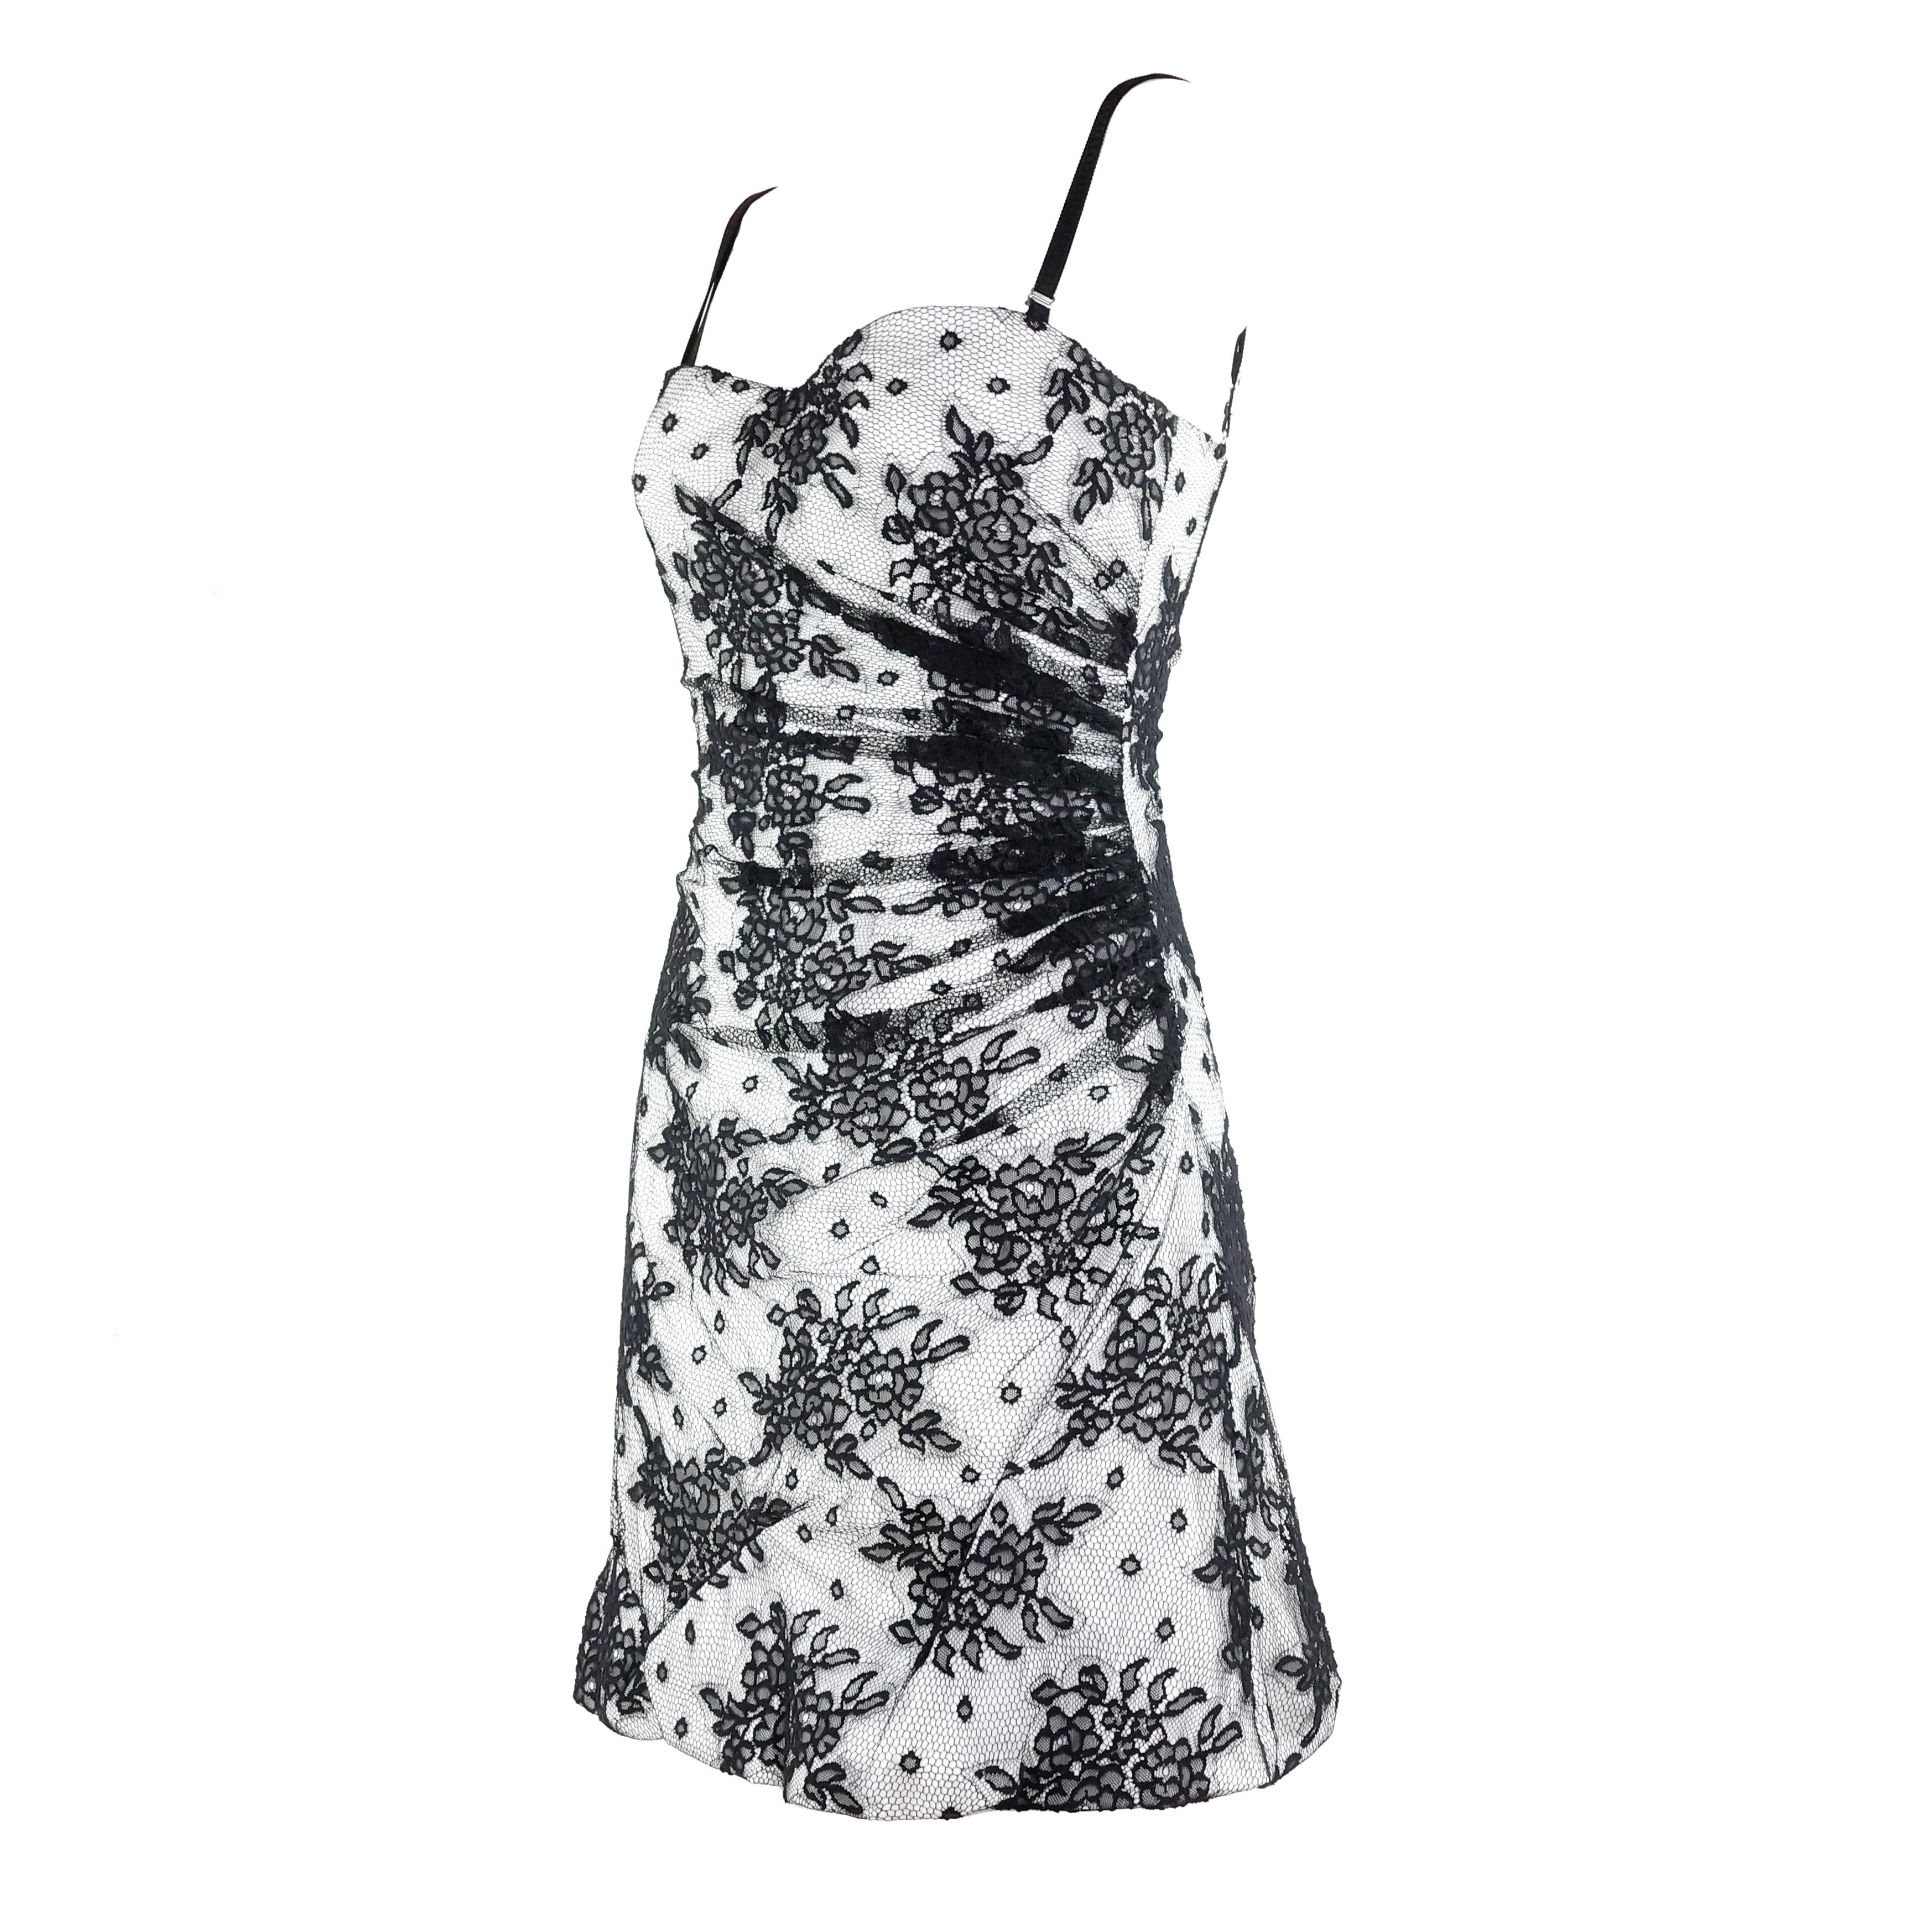 Dolce e Gabbana black and white lace Dress In Excellent Condition For Sale In Bressanone, IT